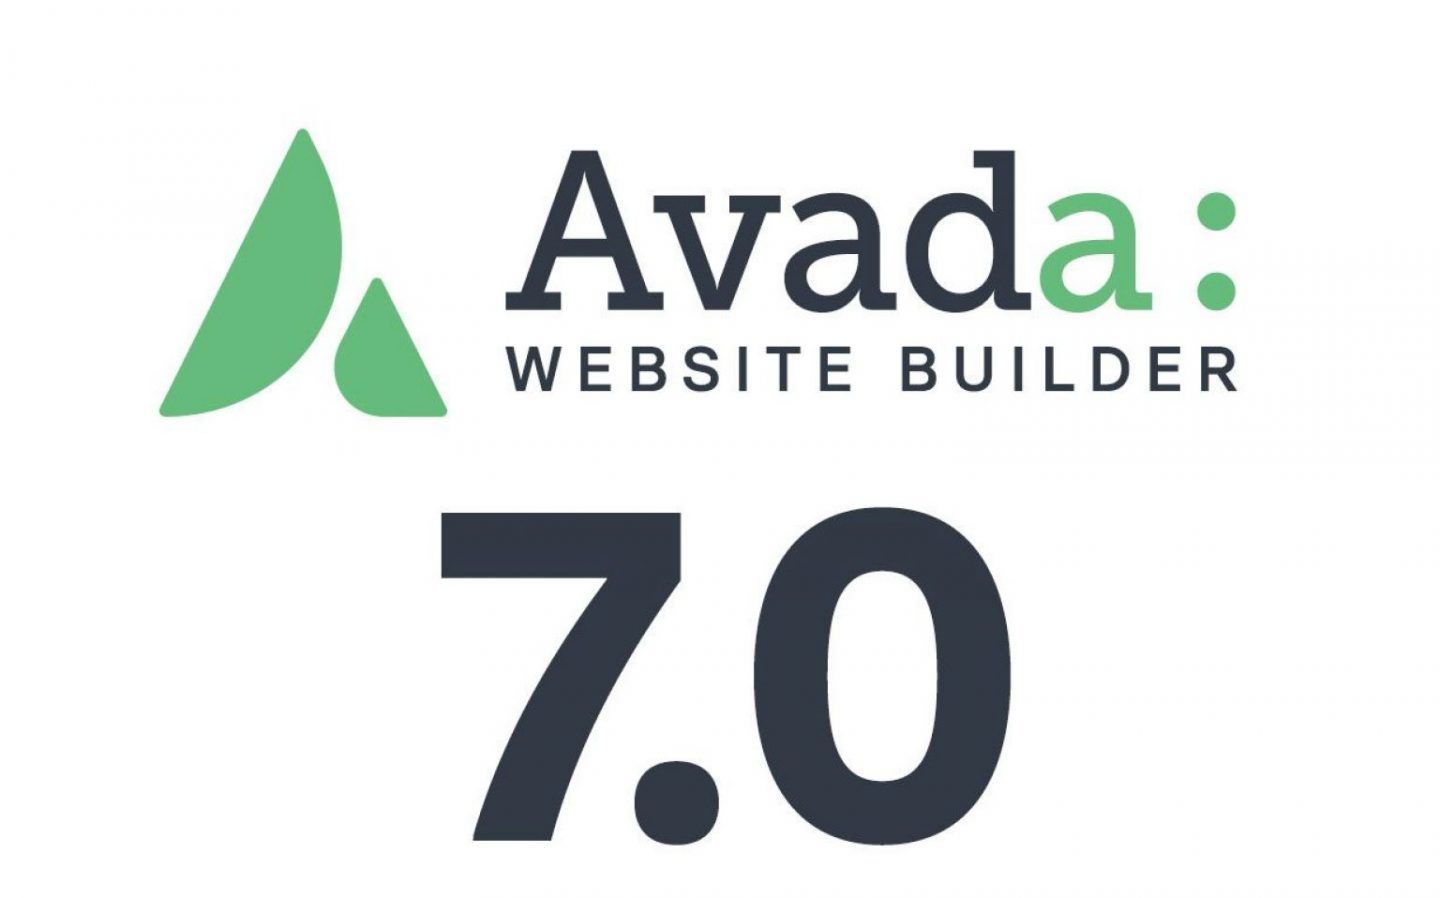 Design Anything, Build Everything in WordPress with Avada Theme